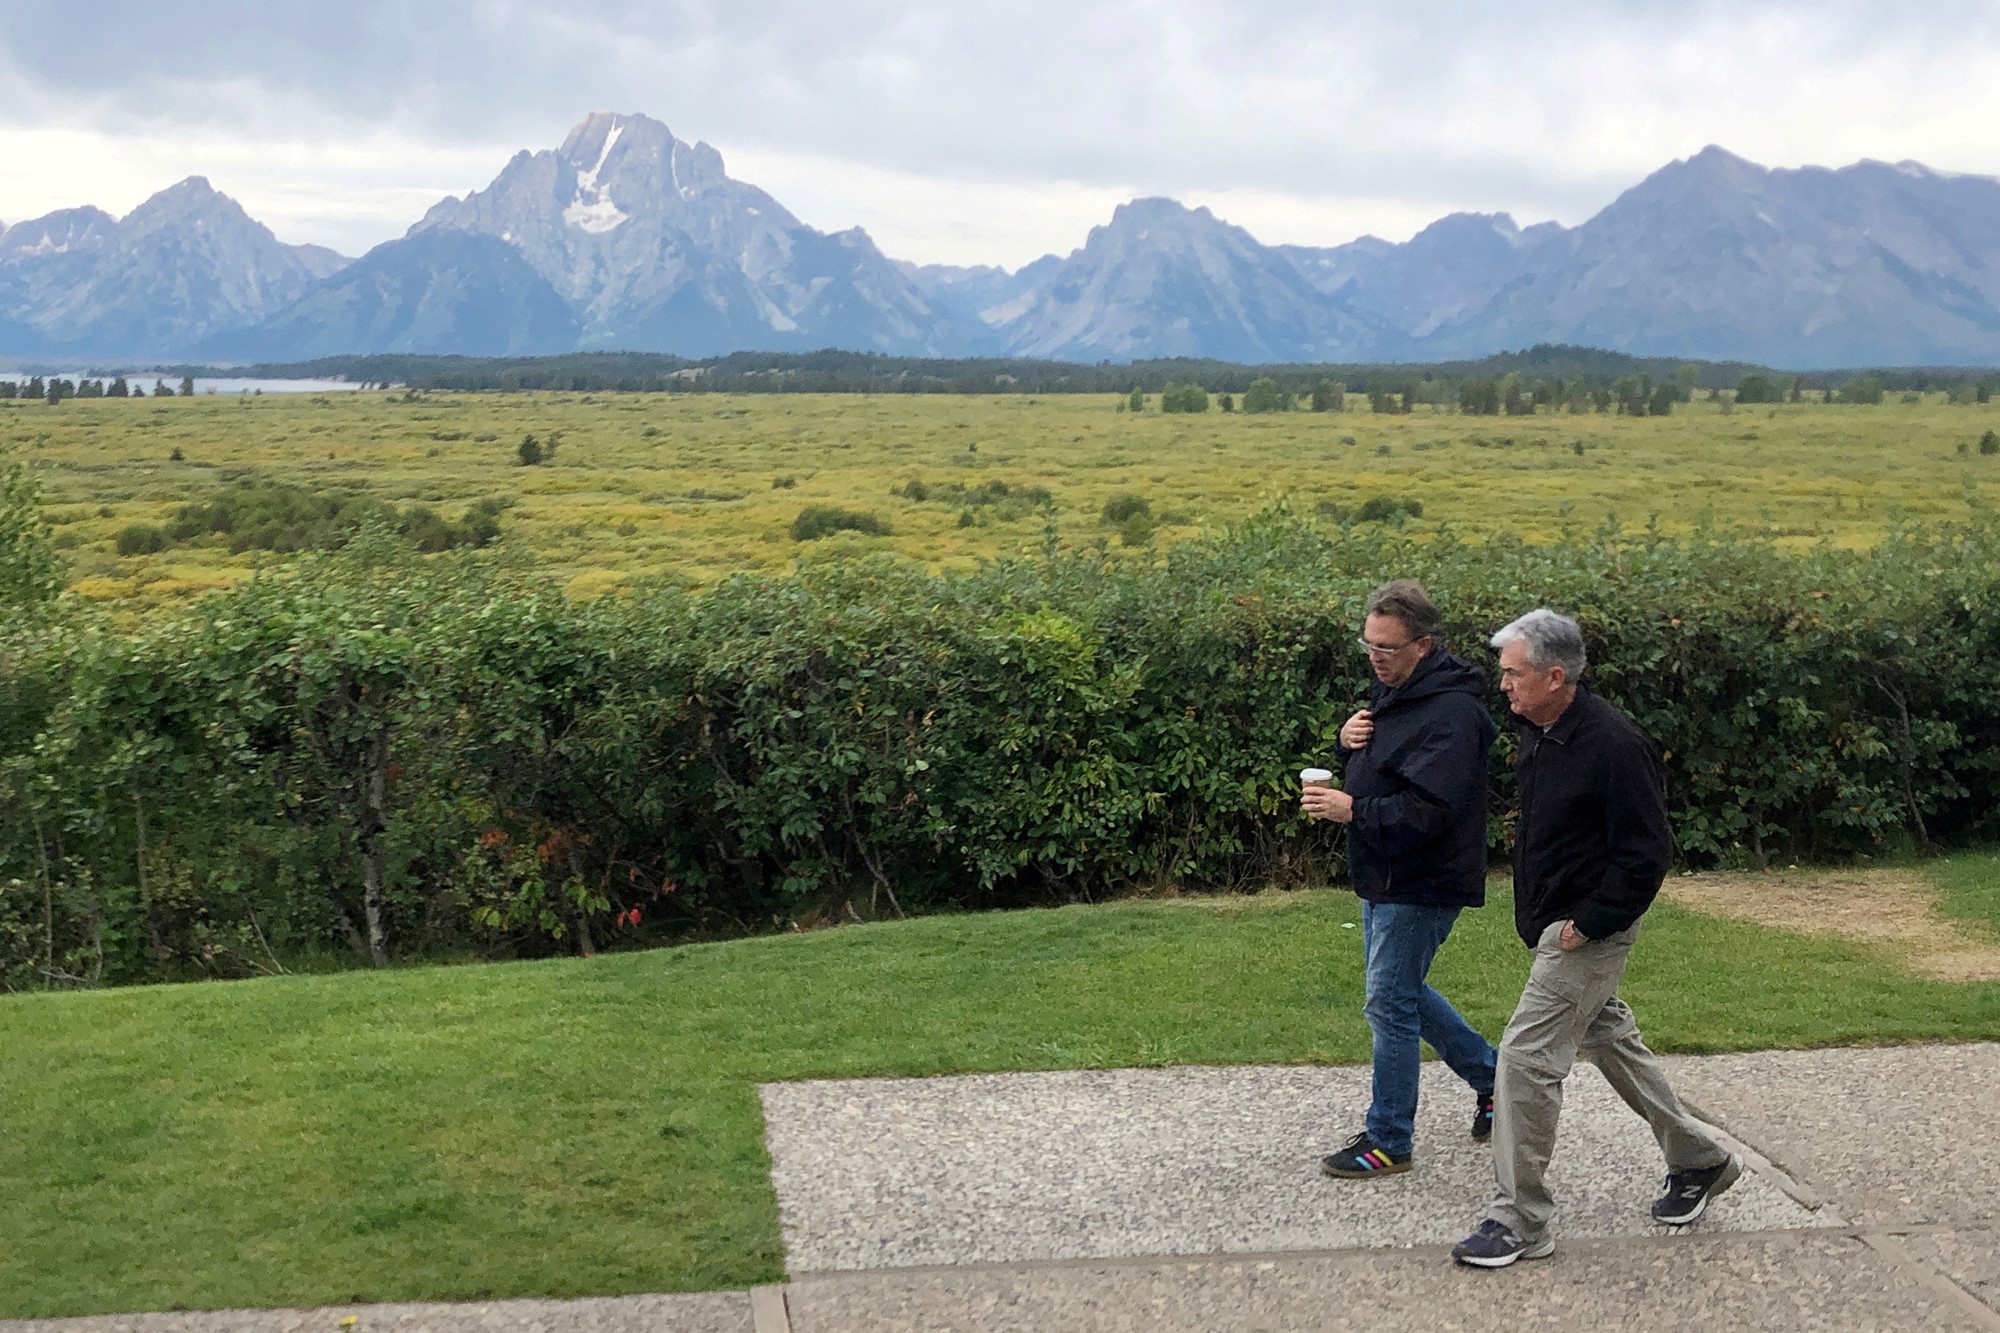 Two casually dressed men walk along a path with green fields and mountain ranges in the background.